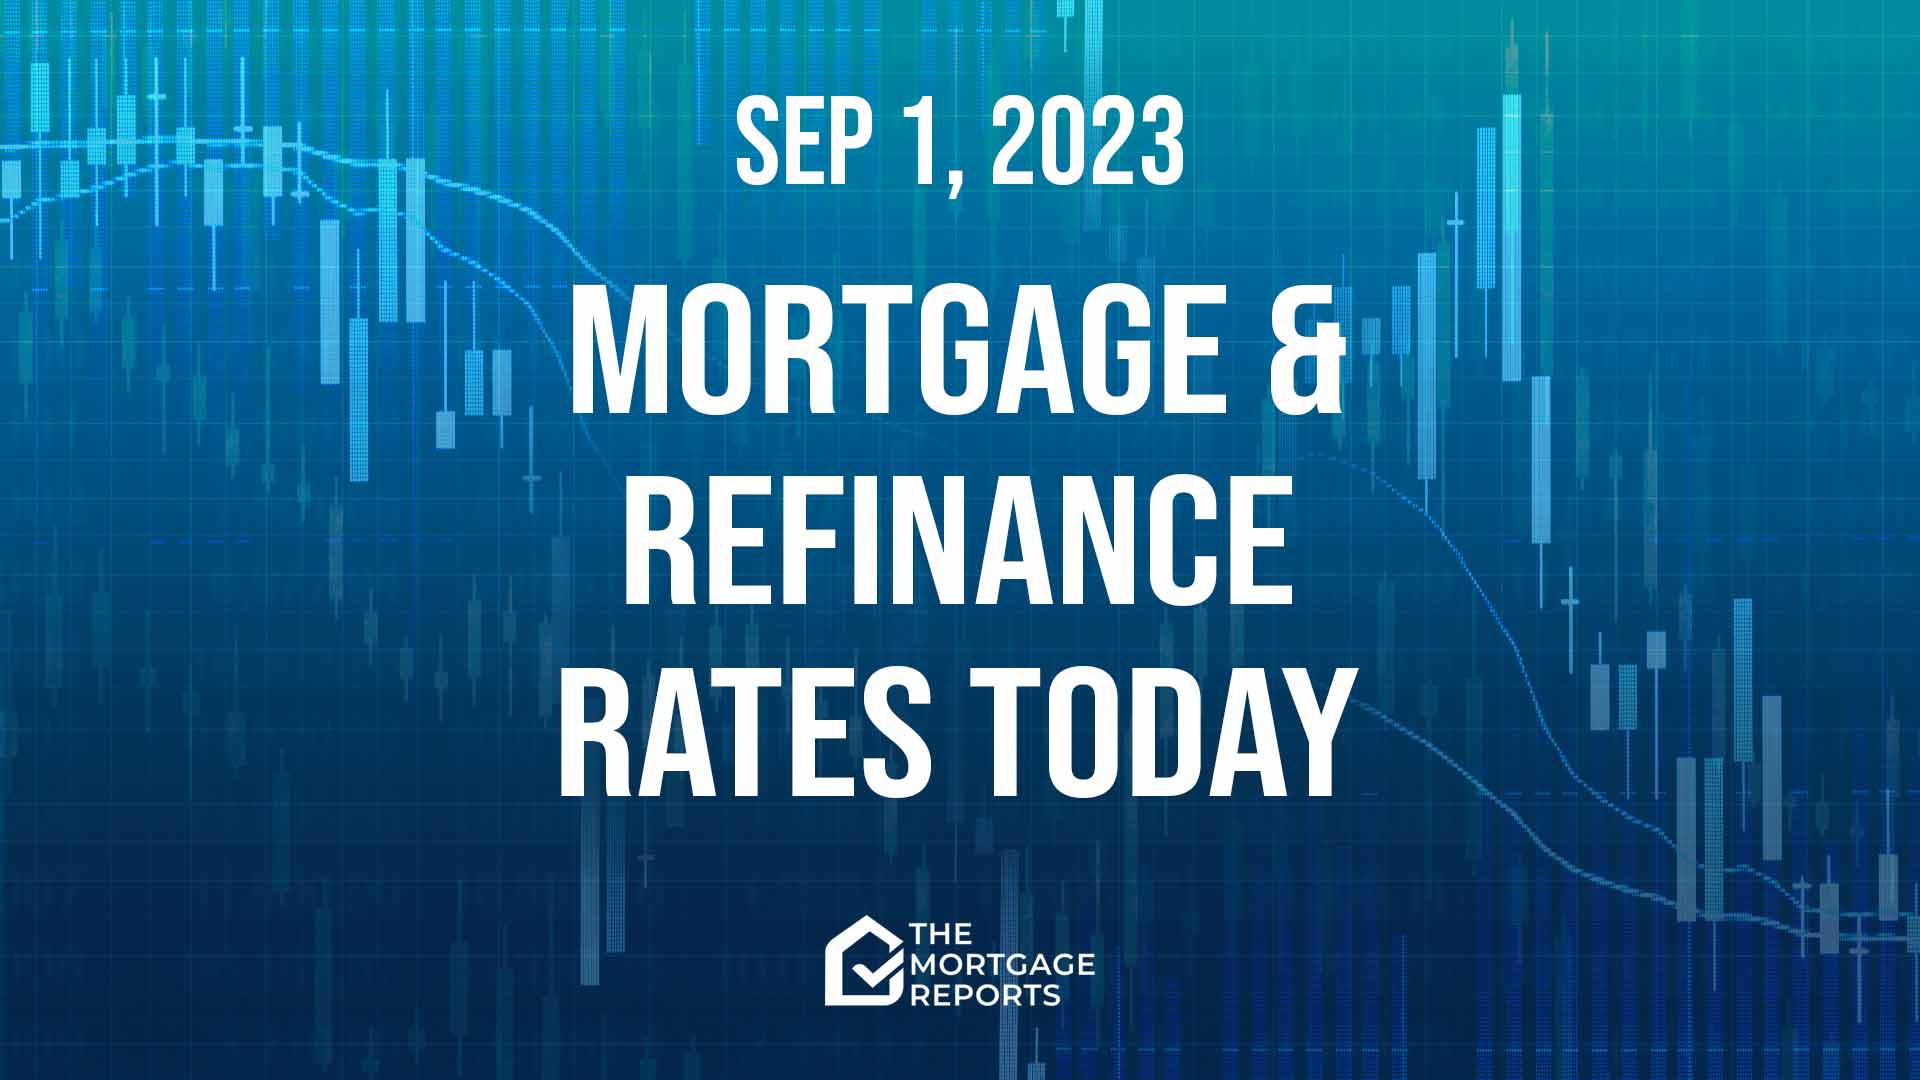 Mortgage rates today, Sep. 1, 2023